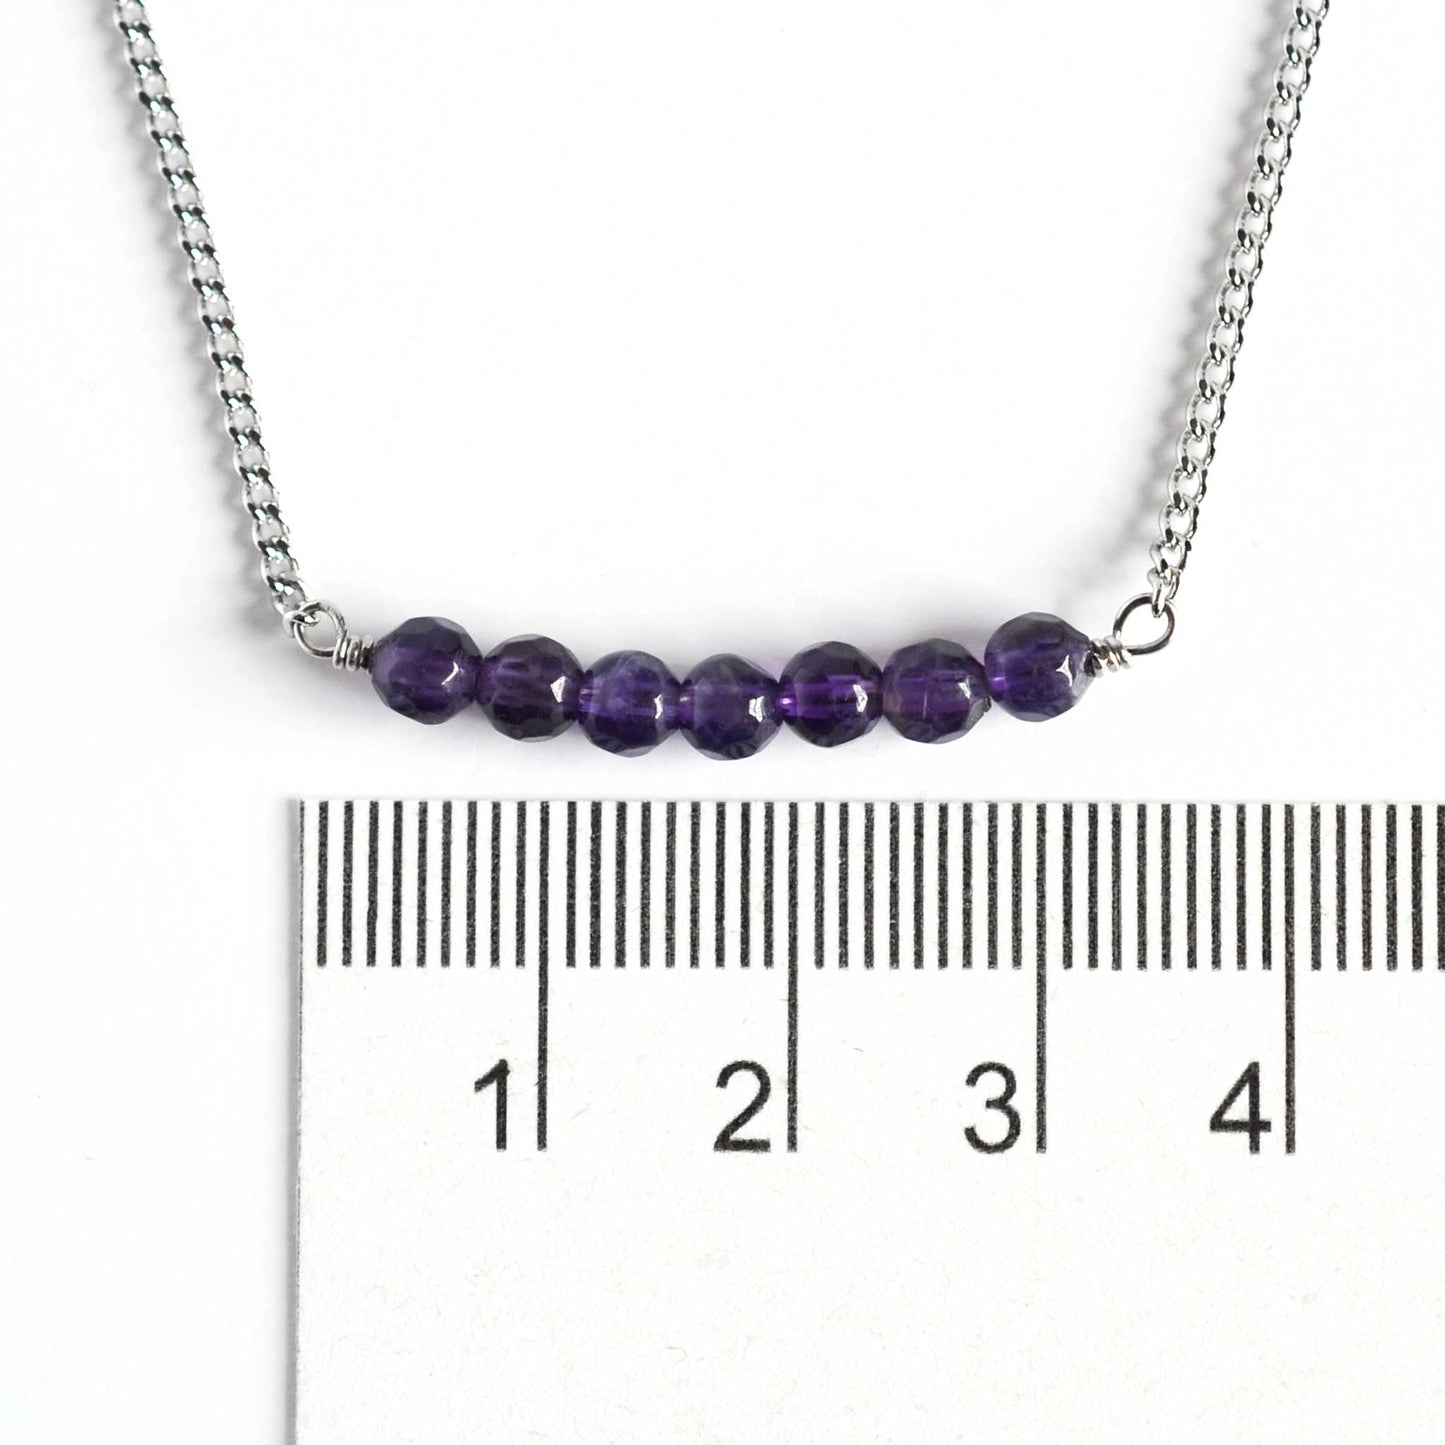 Dainty Amethyst necklace with 4mm gemstone beads next to ruler